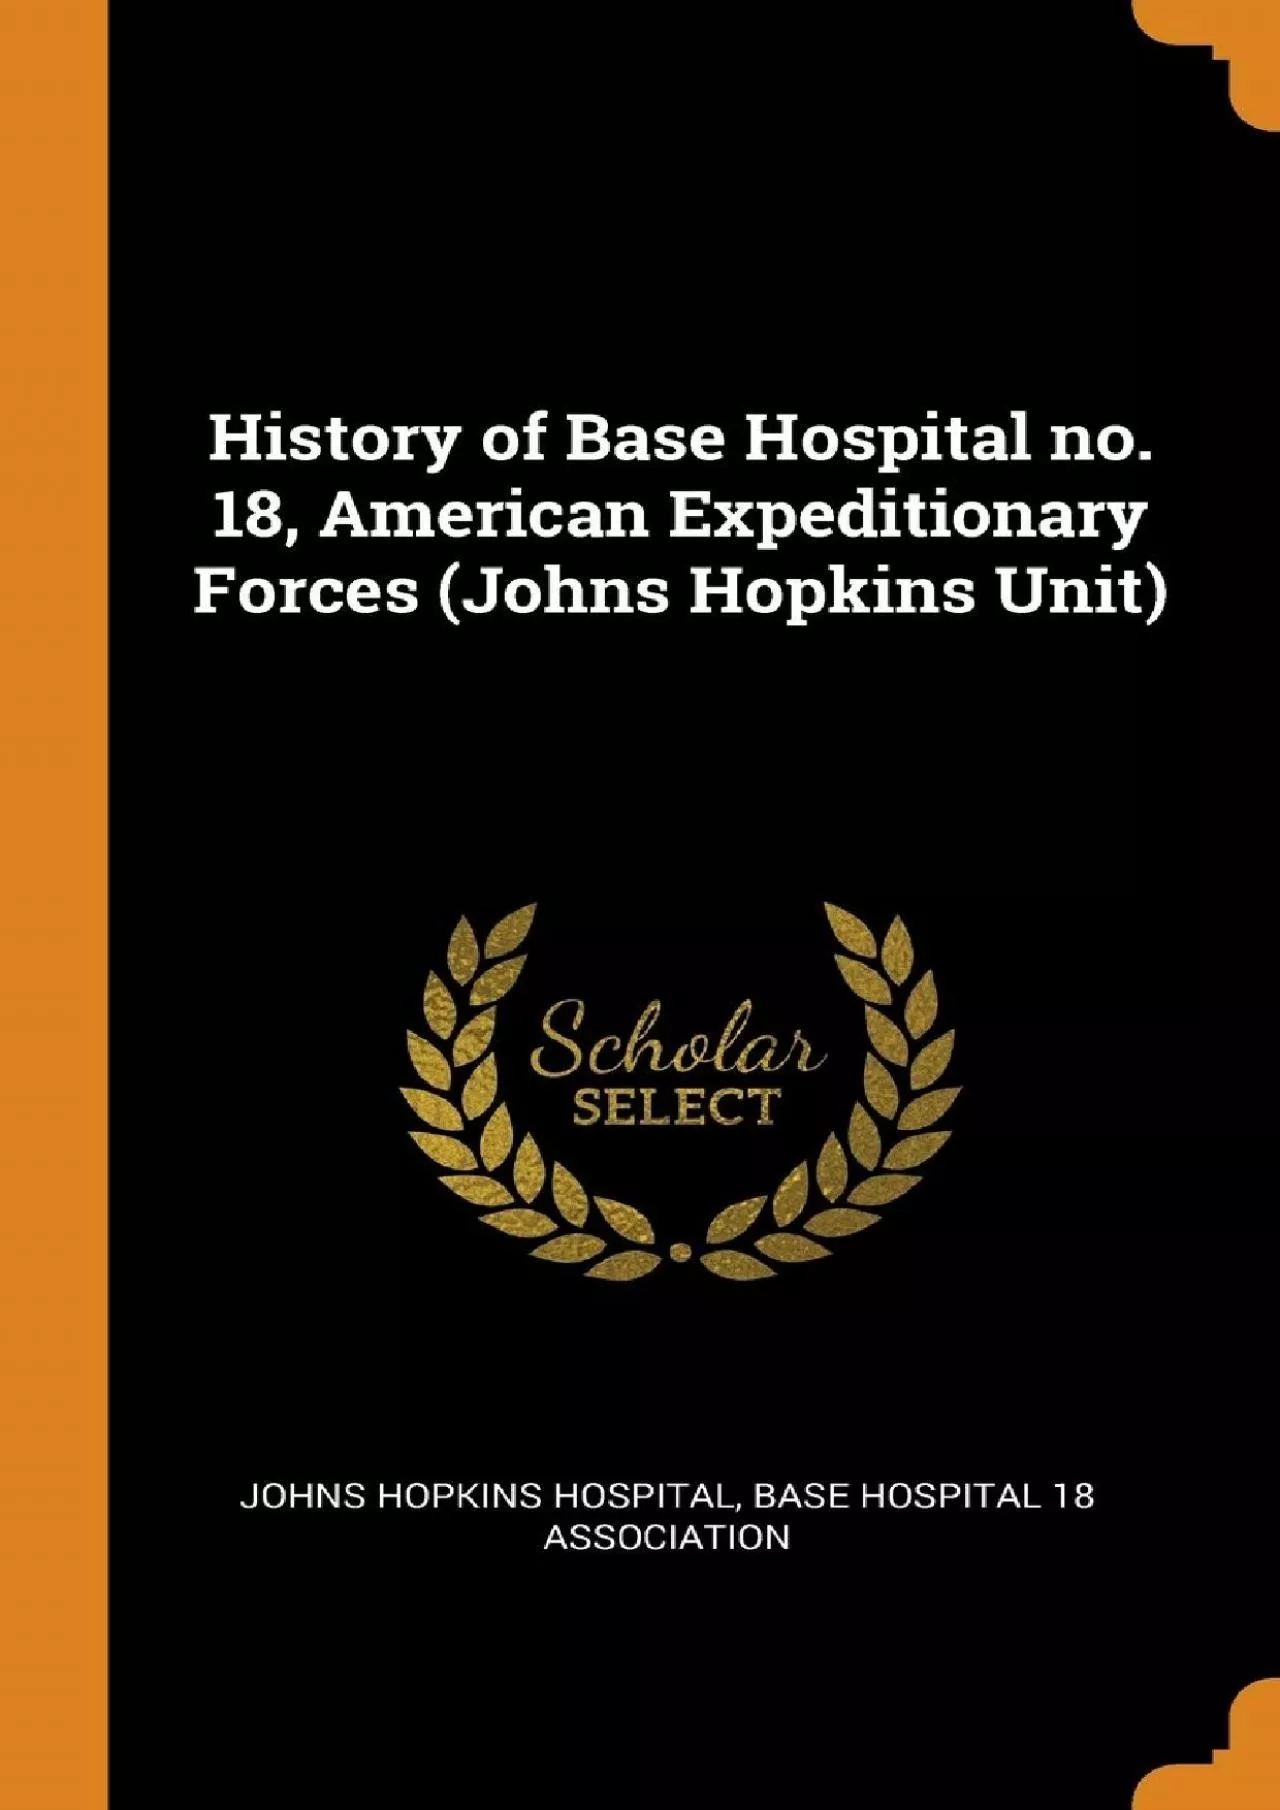 (DOWNLOAD)-History of Base Hospital no. 18, American Expeditionary Forces (Johns Hopkins